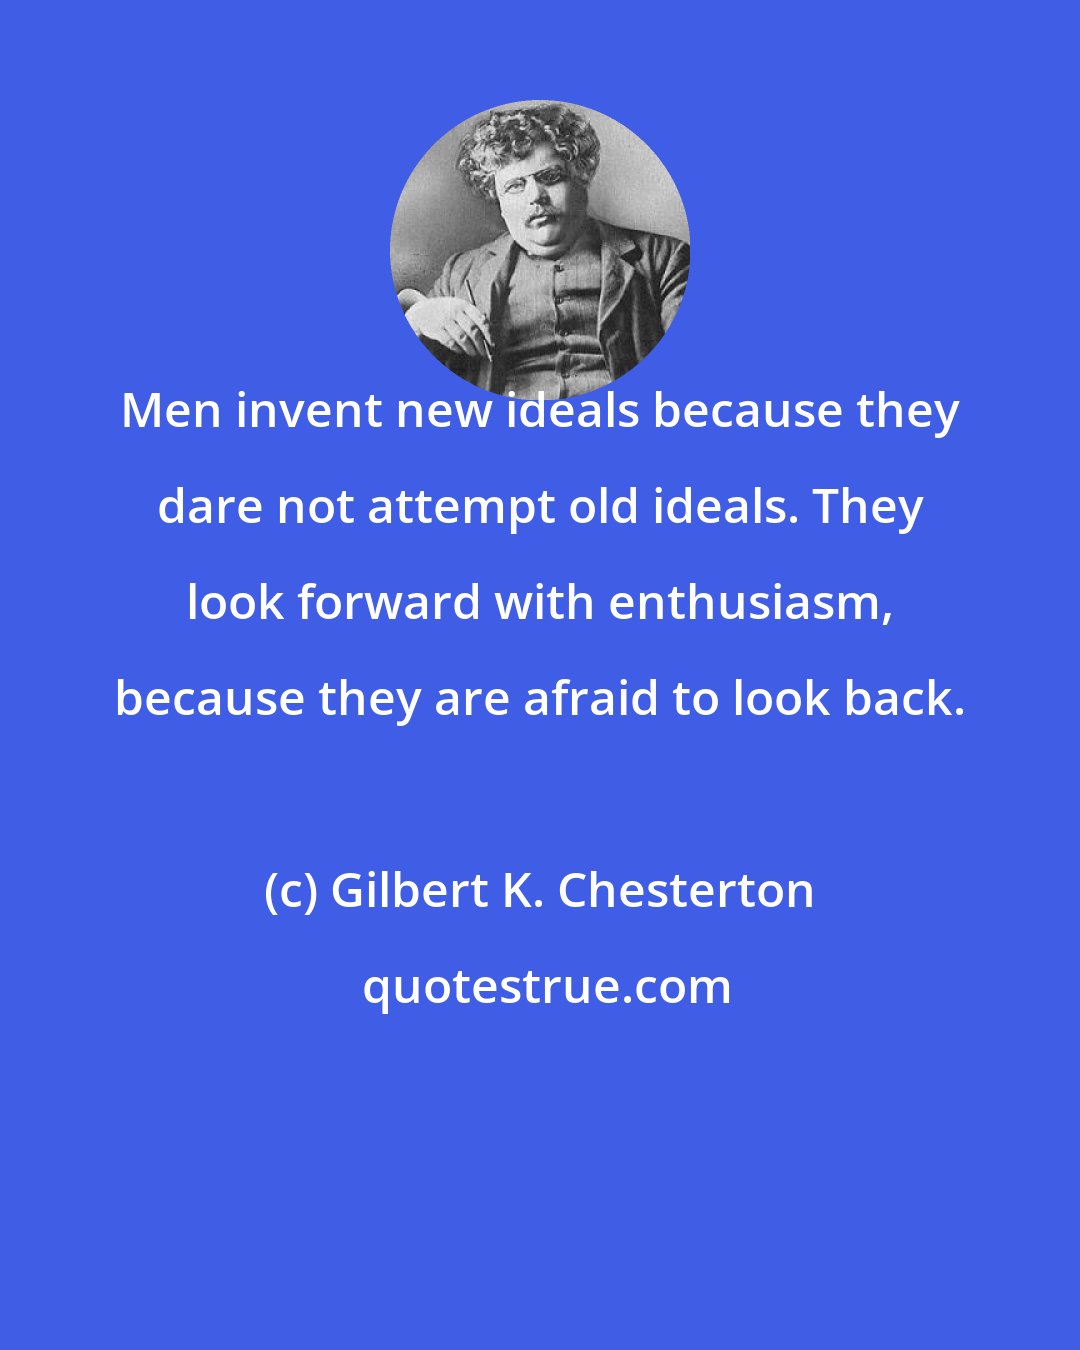 Gilbert K. Chesterton: Men invent new ideals because they dare not attempt old ideals. They look forward with enthusiasm, because they are afraid to look back.